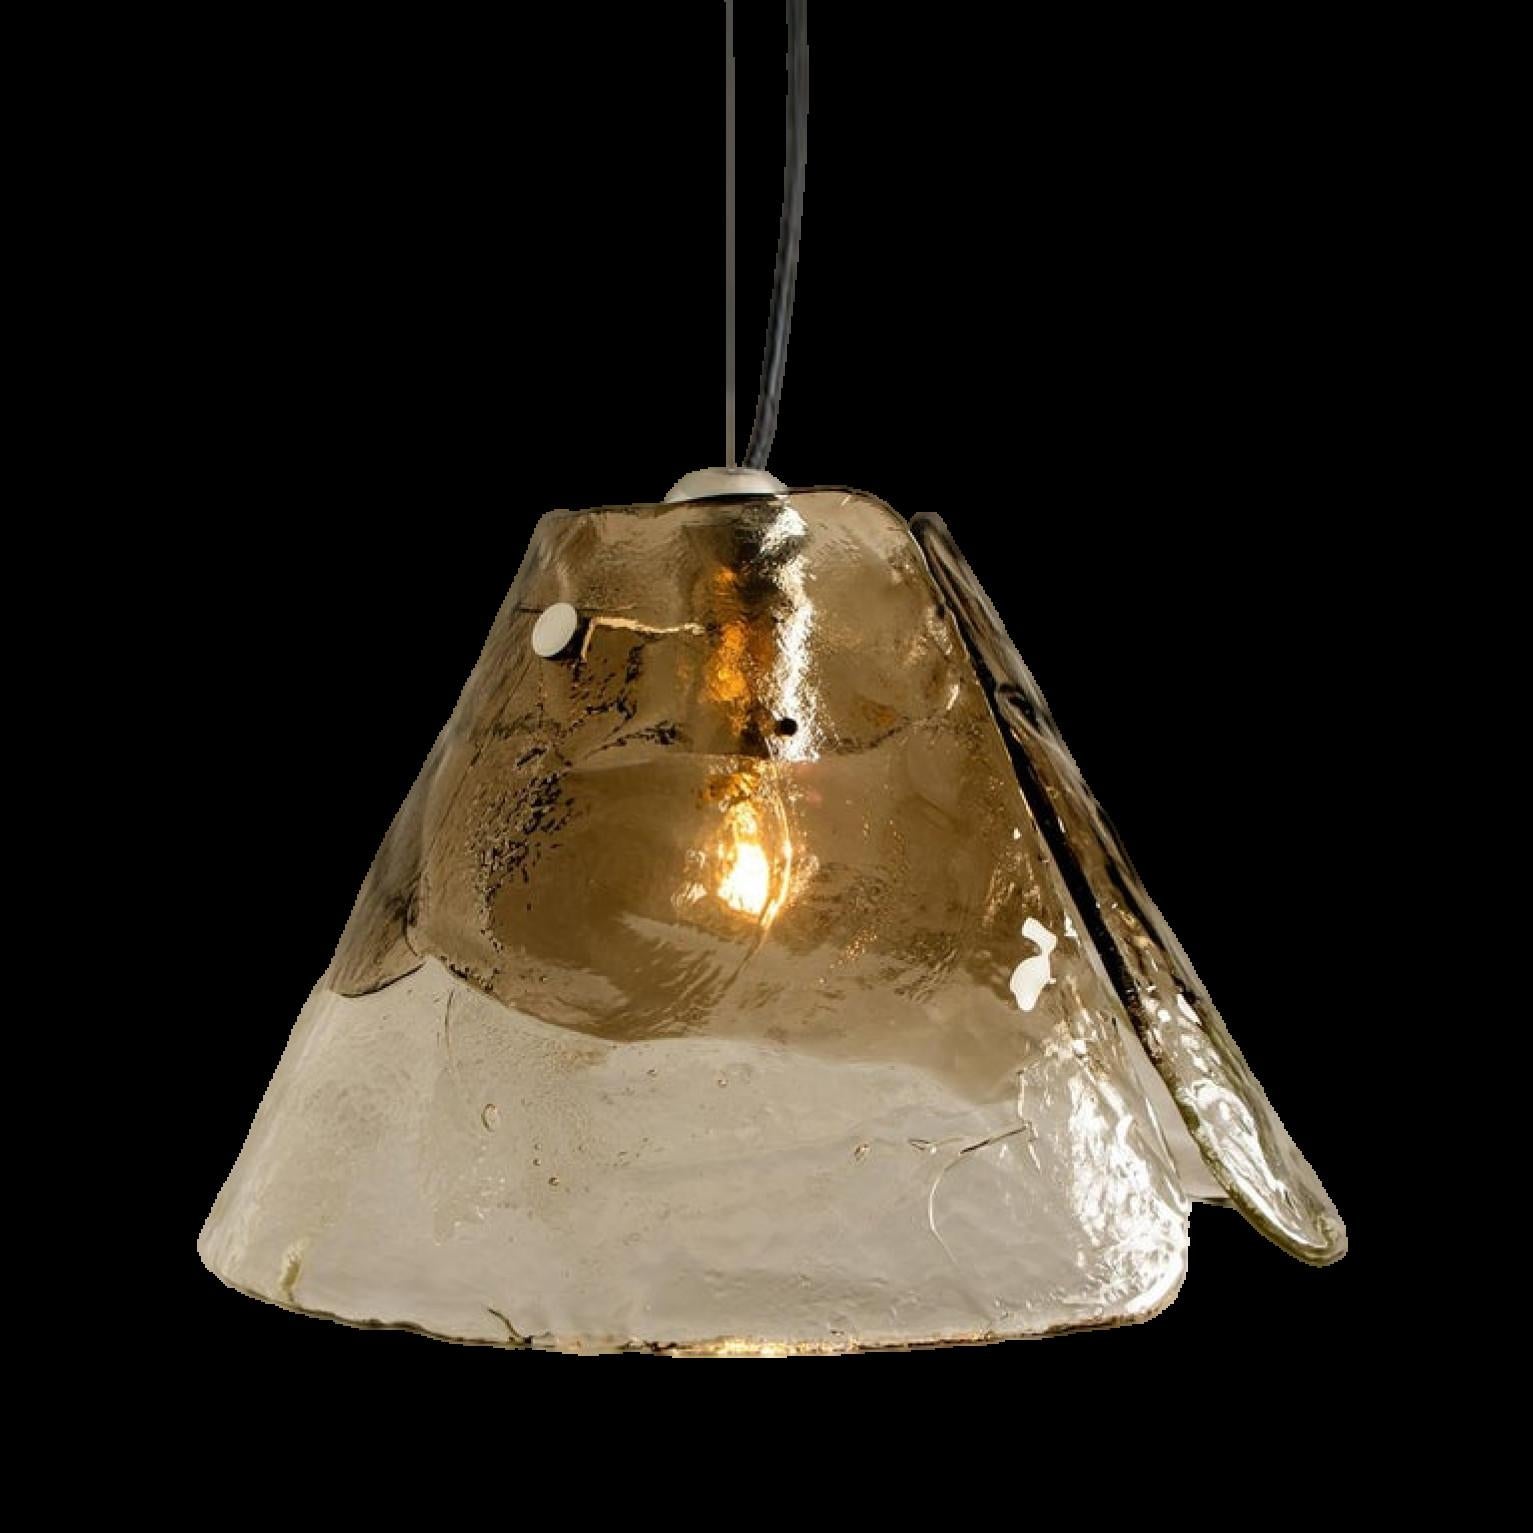 Pendant lamp by Carlo Nason for Mazzega.
Four crystal clear and smoked leaves compose this beautiful piece made in thick handmade Murano glass.

Measures: H 15.3” (30 cm) without cable/wire, D 18.9